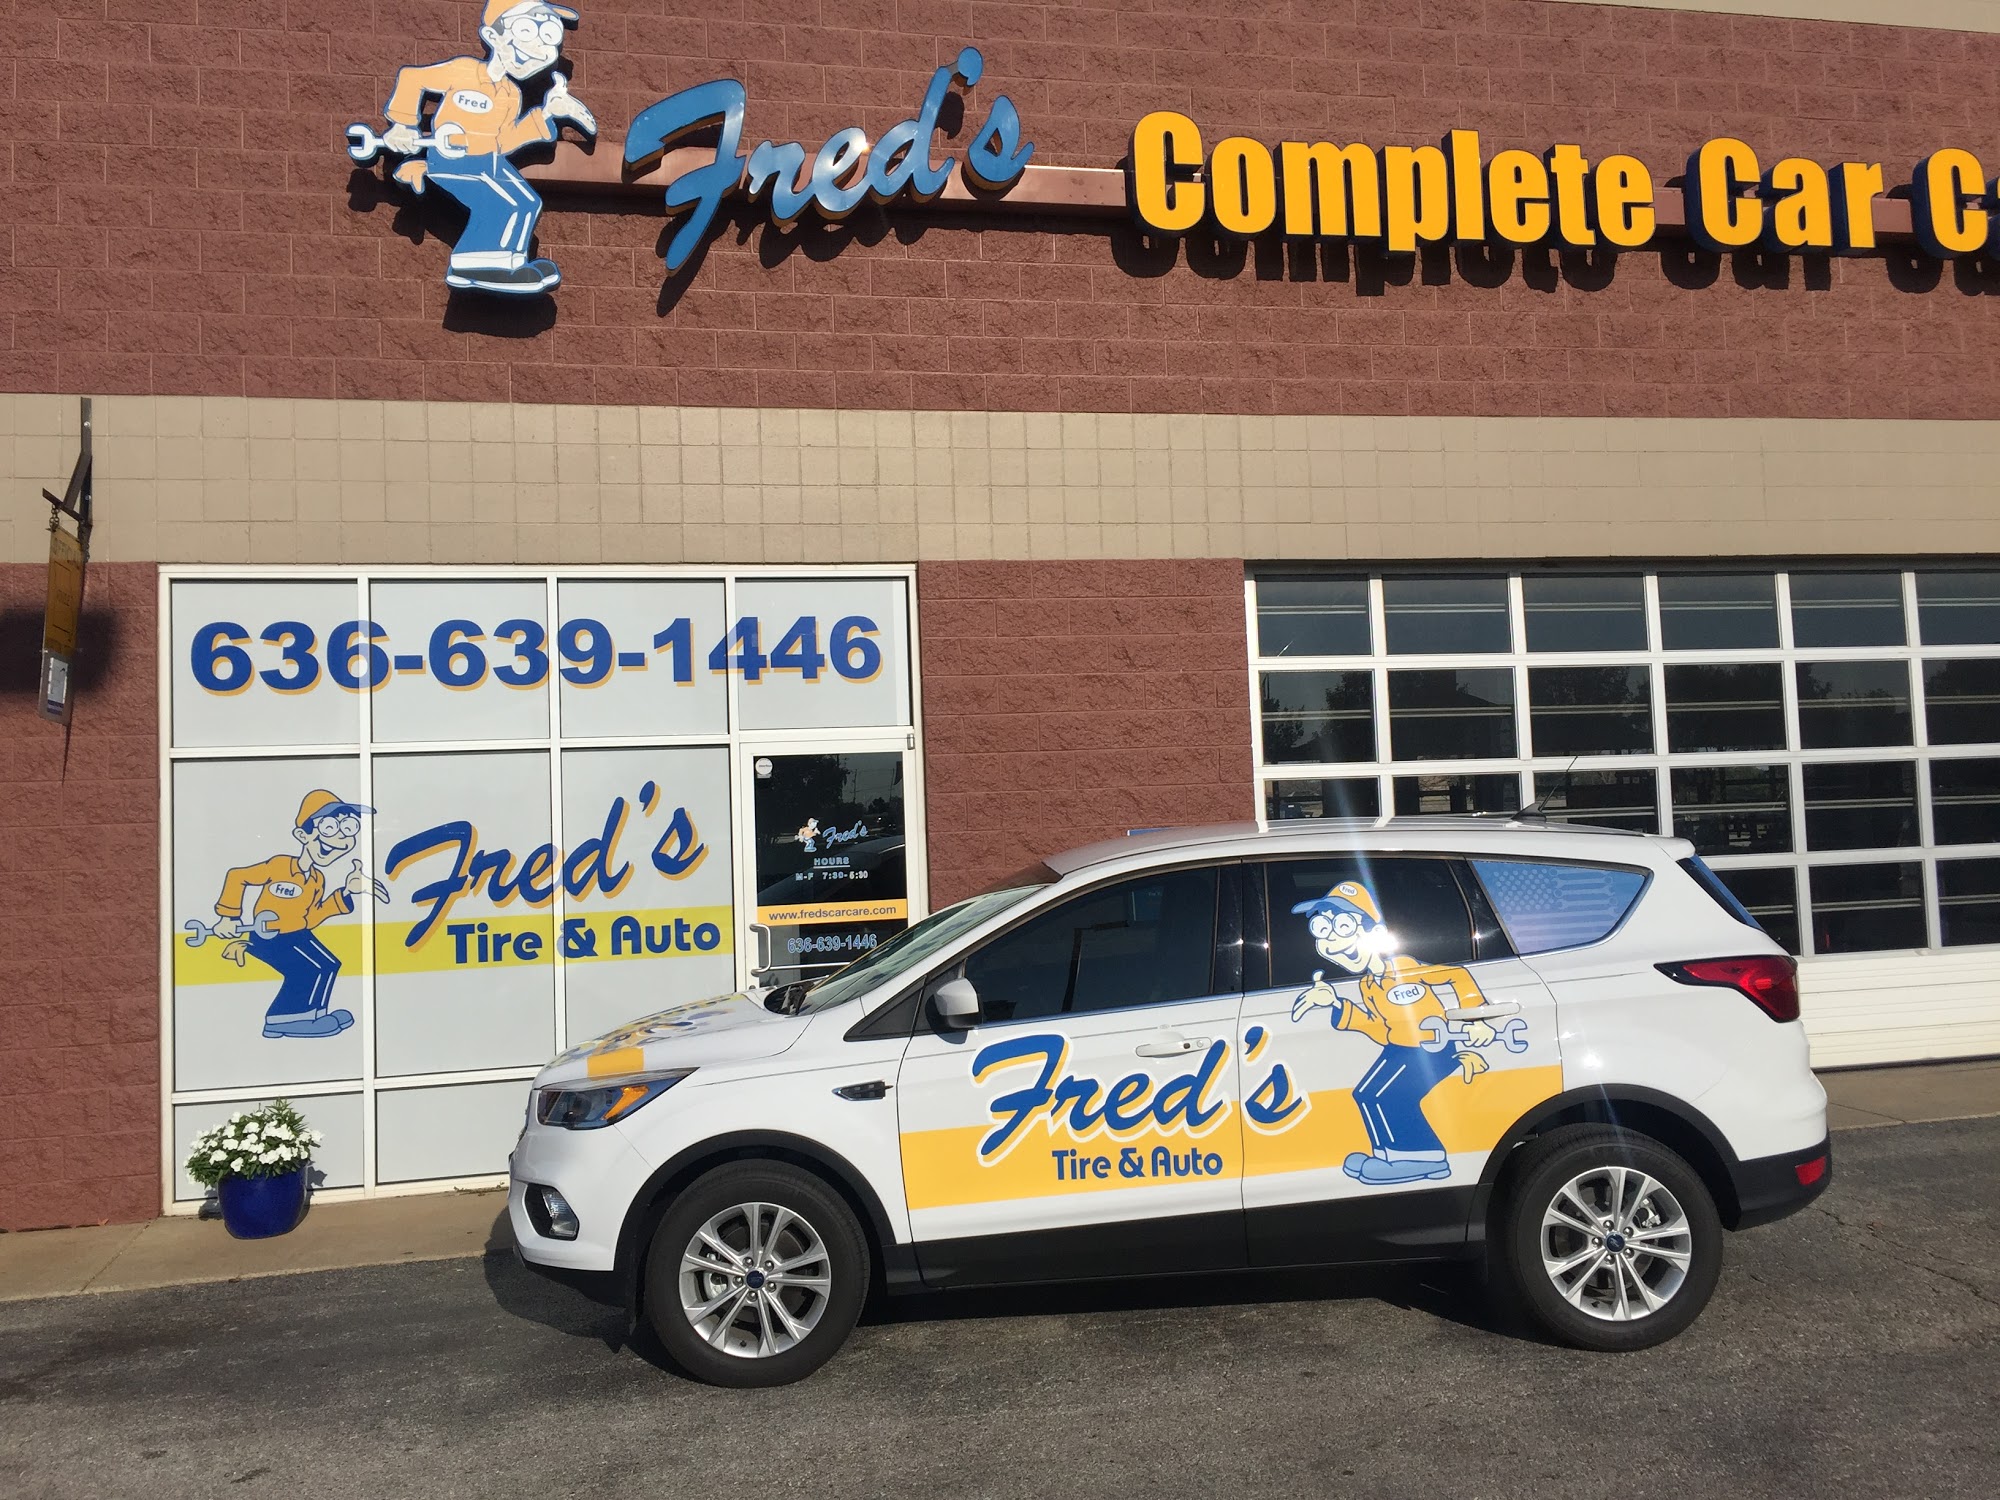 Fred's Complete Car Care